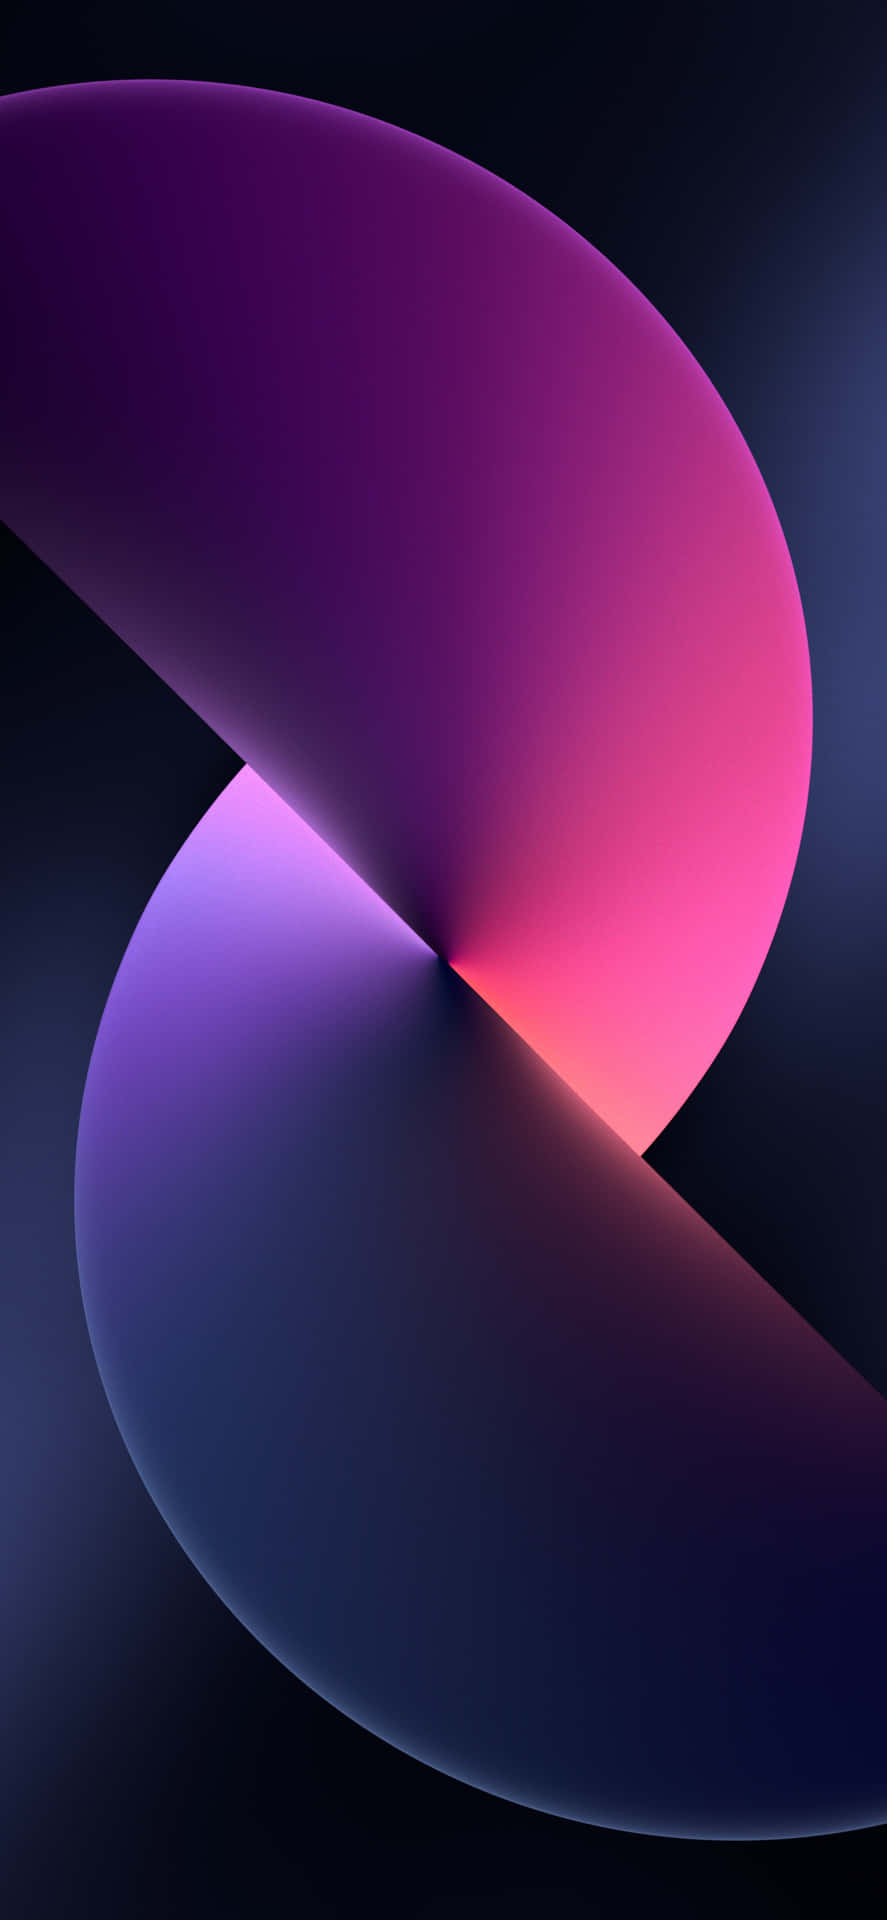 Abstract Apple Event Background Wallpaper